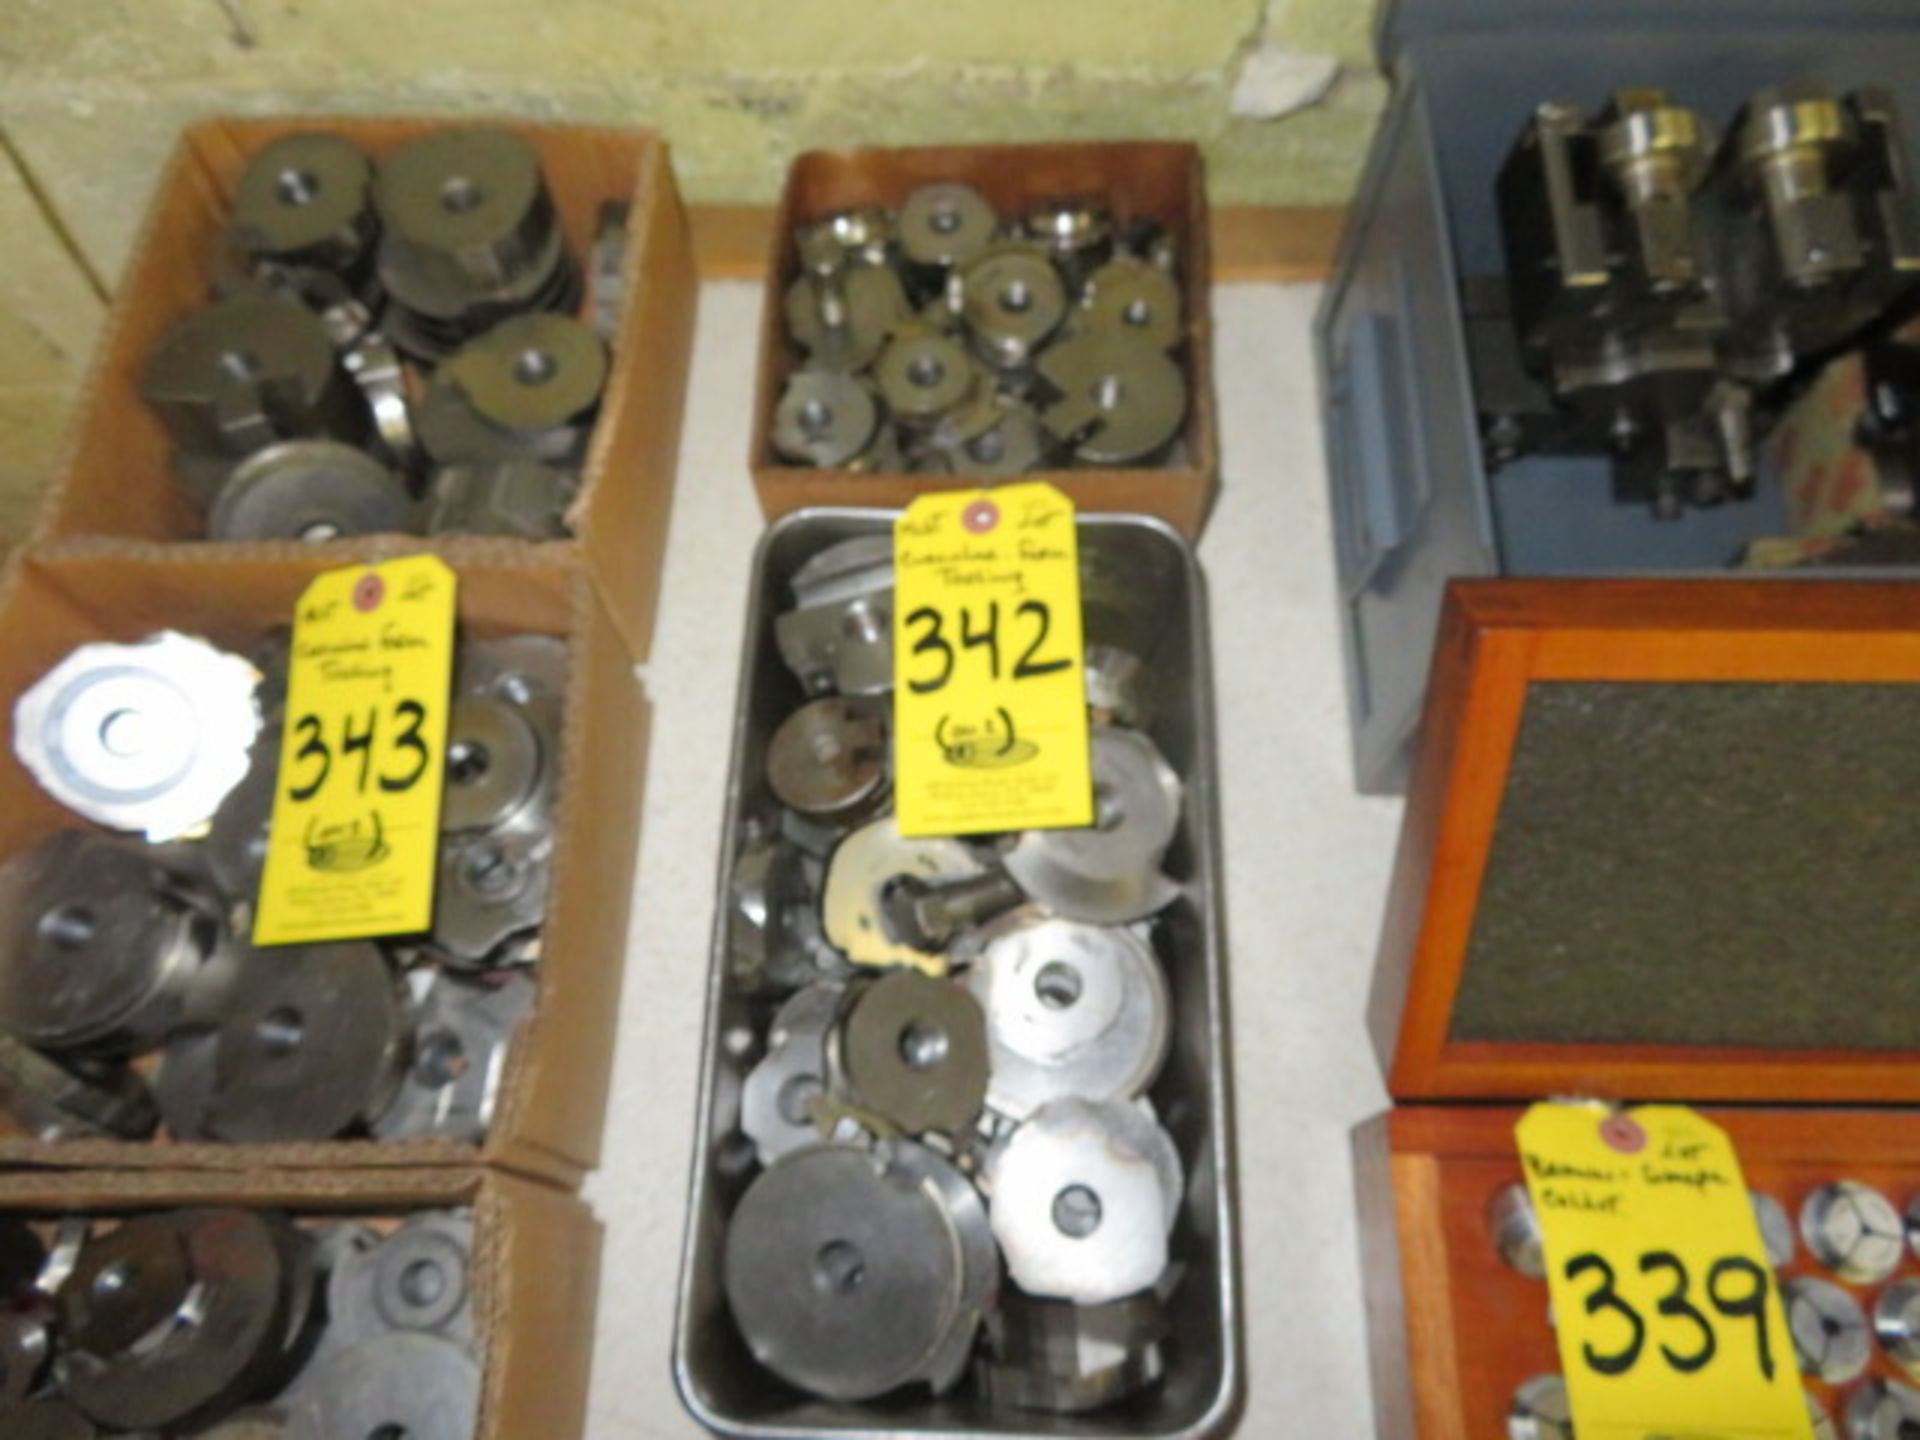 (2) BOXES OF CIRCULAR FORM TOOLING